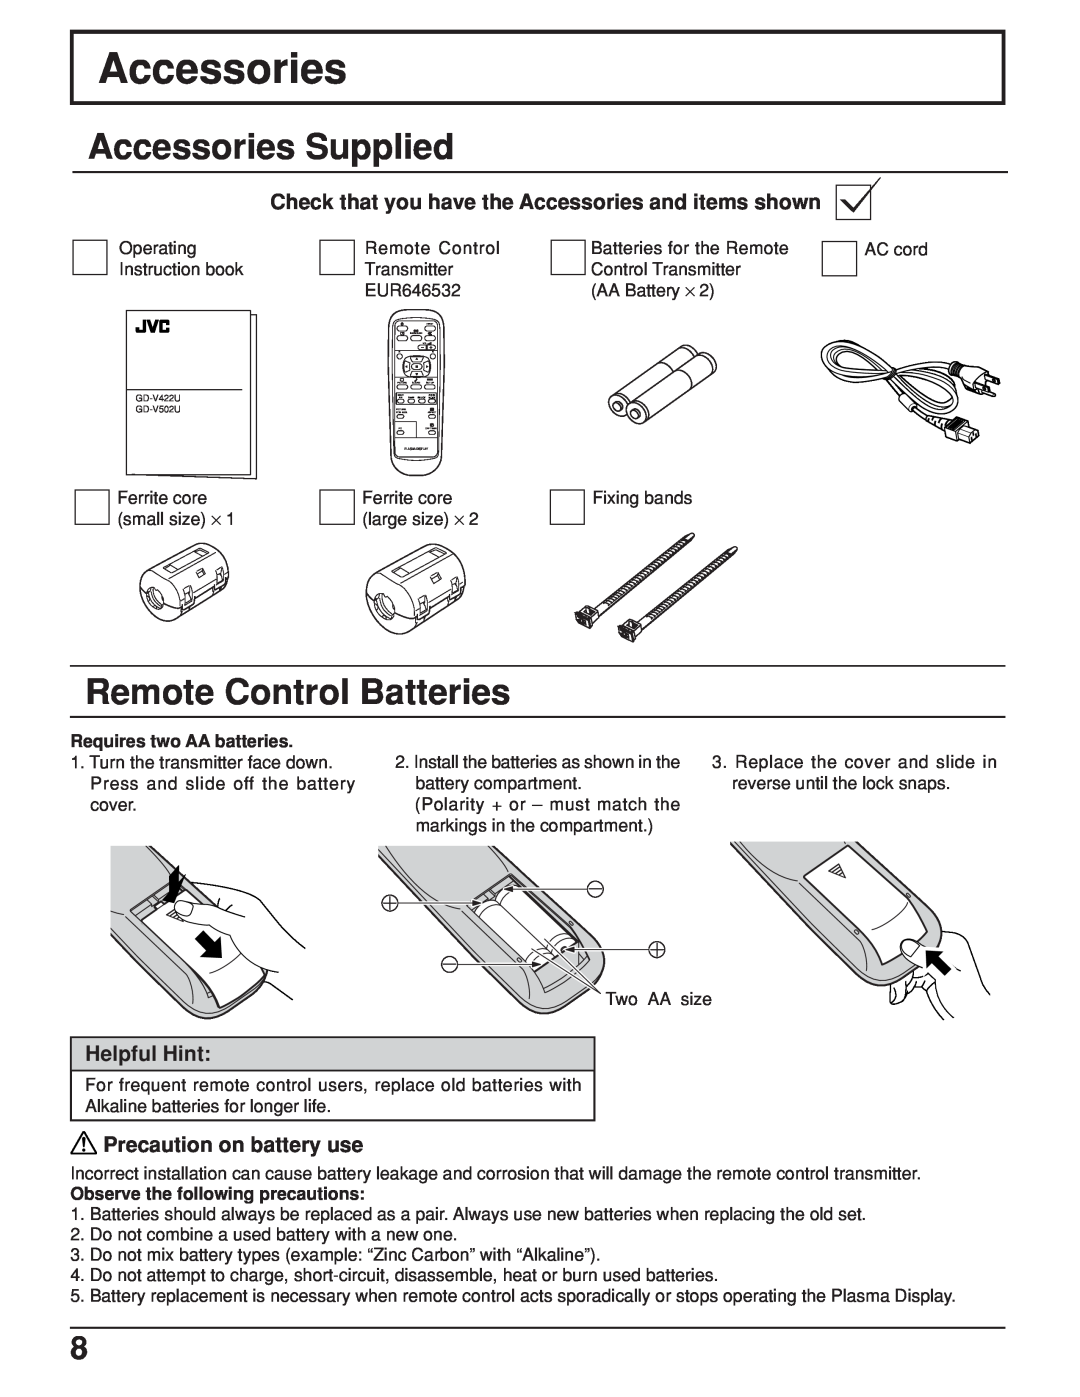 JVC GD-V422U manual Accessories Supplied, Remote Control Batteries, Check that you have the Accessories and items shown 